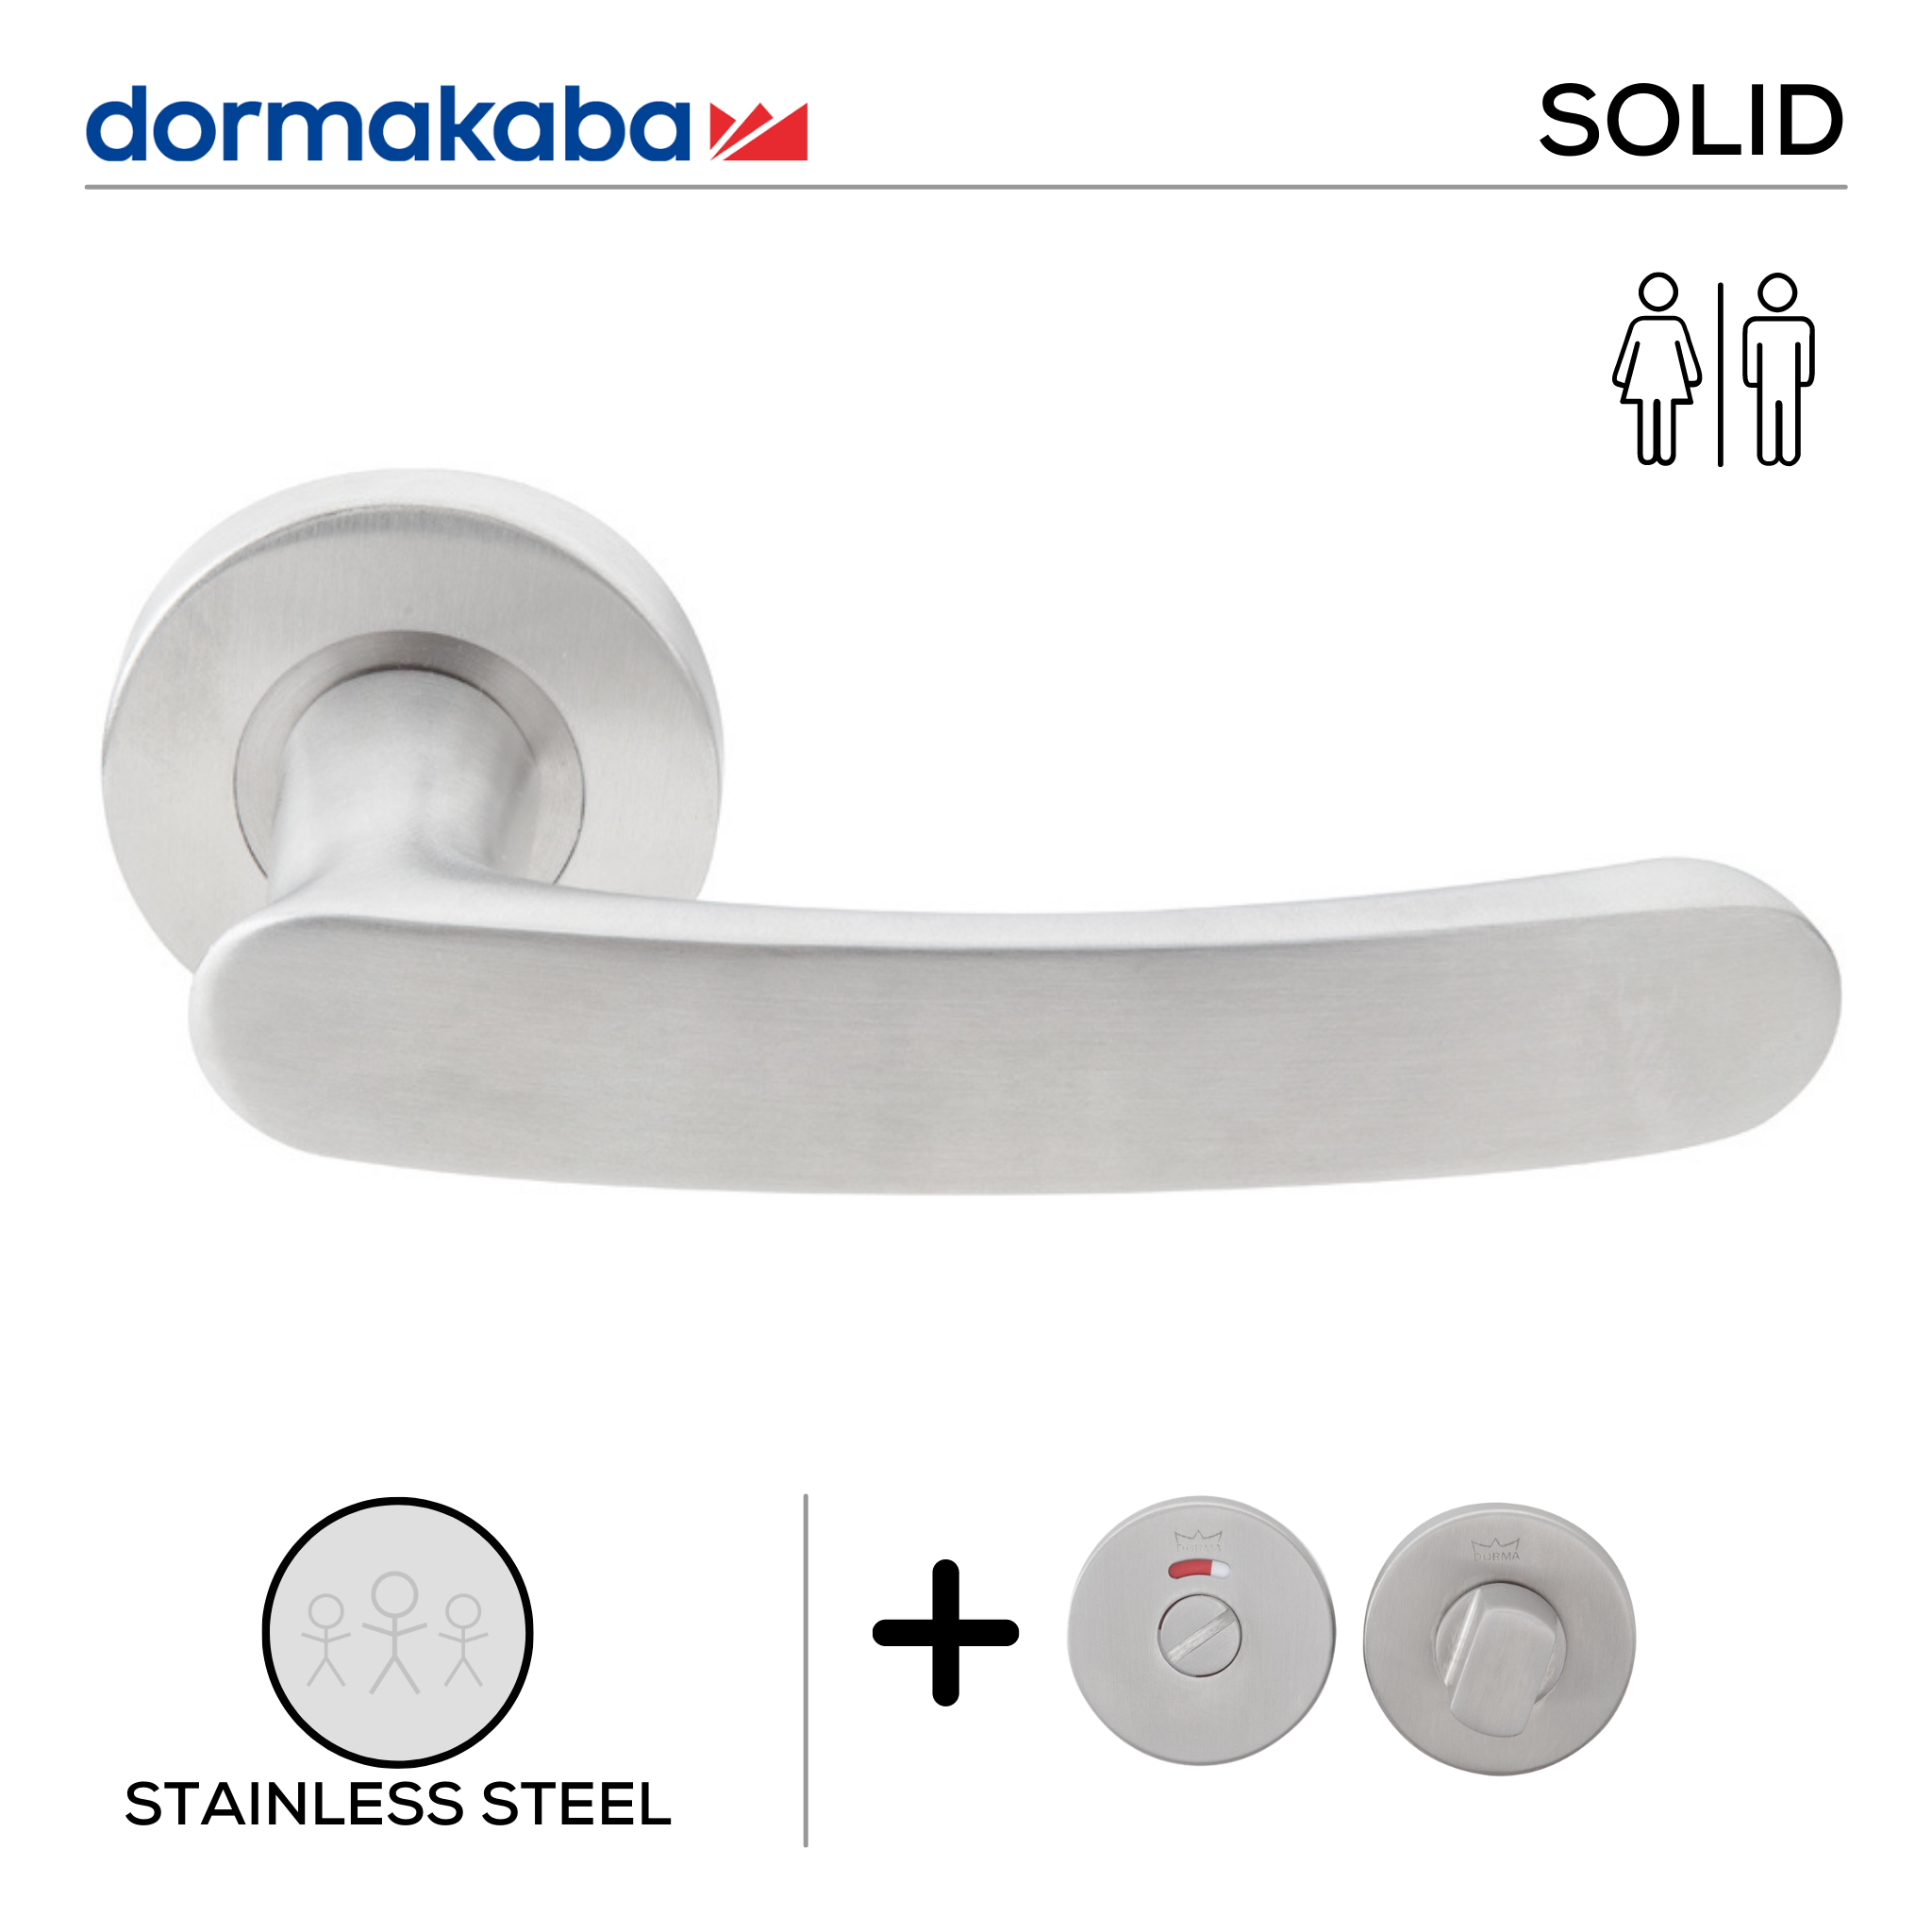 SH 827 Bathroom W/C, Lever Handles, Solid, On Round Rose, With Bathroom (WC) Indicator Set - DWC 005, 137mm (l), Stainless Steel, DORMAKABA